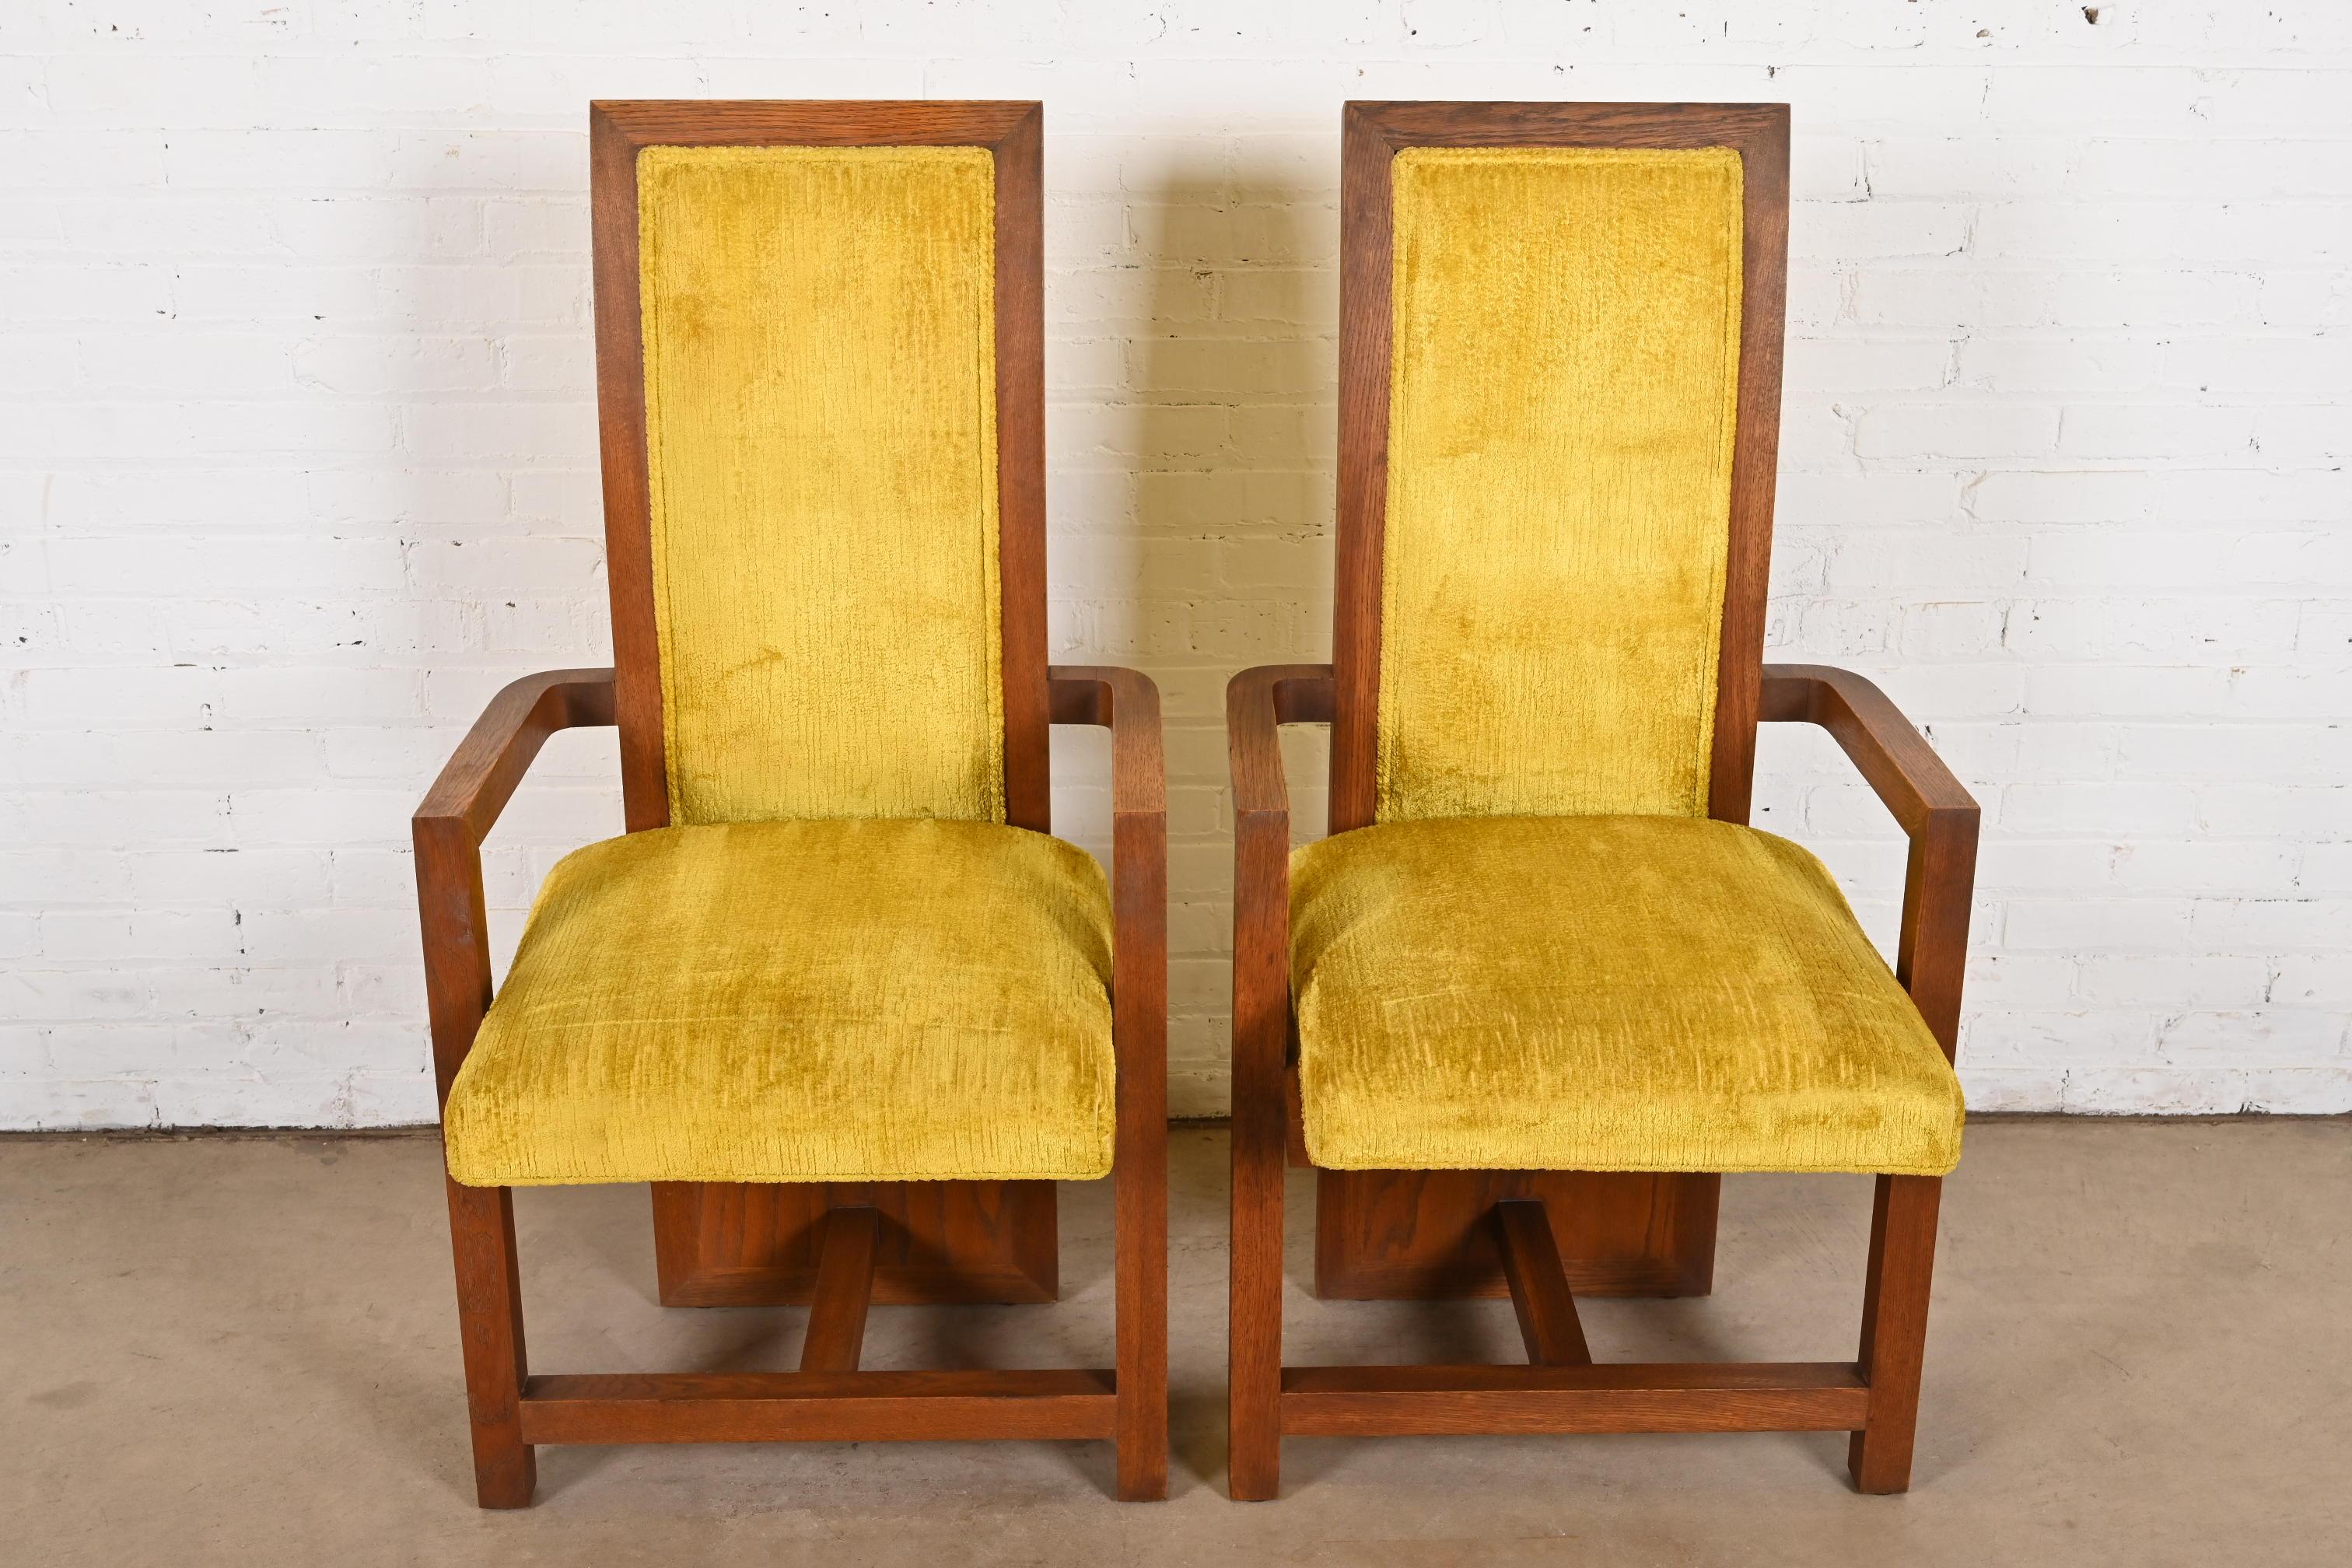 A very rare and exceptional pair of Mid-Century Modern 